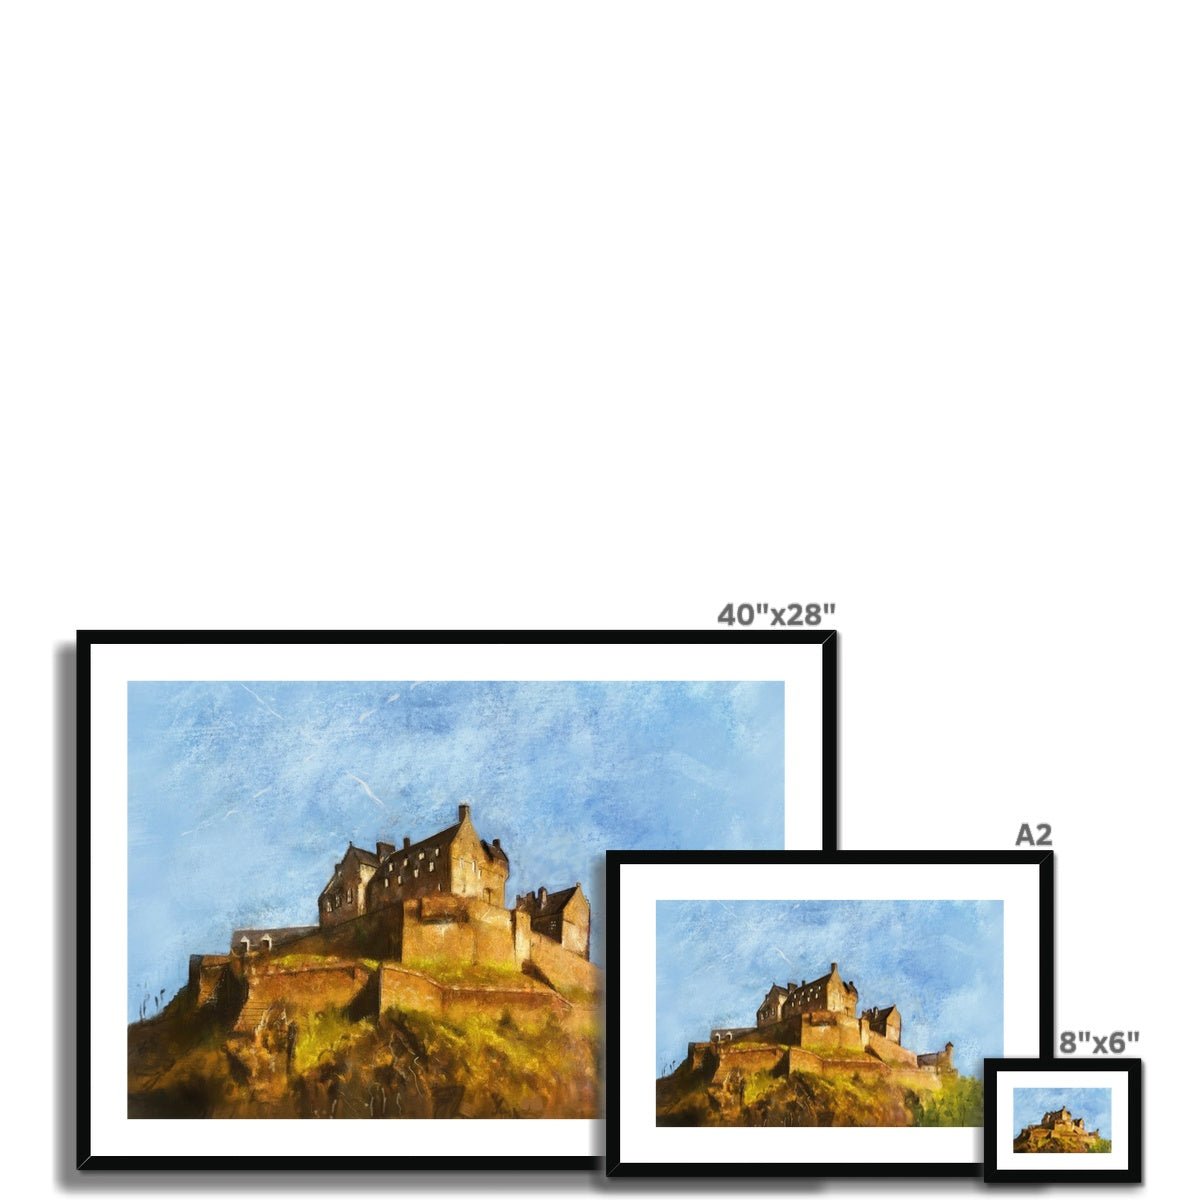 Edinburgh Castle Painting | Framed & Mounted Prints From Scotland-Framed & Mounted Prints-Historic & Iconic Scotland Art Gallery-Paintings, Prints, Homeware, Art Gifts From Scotland By Scottish Artist Kevin Hunter